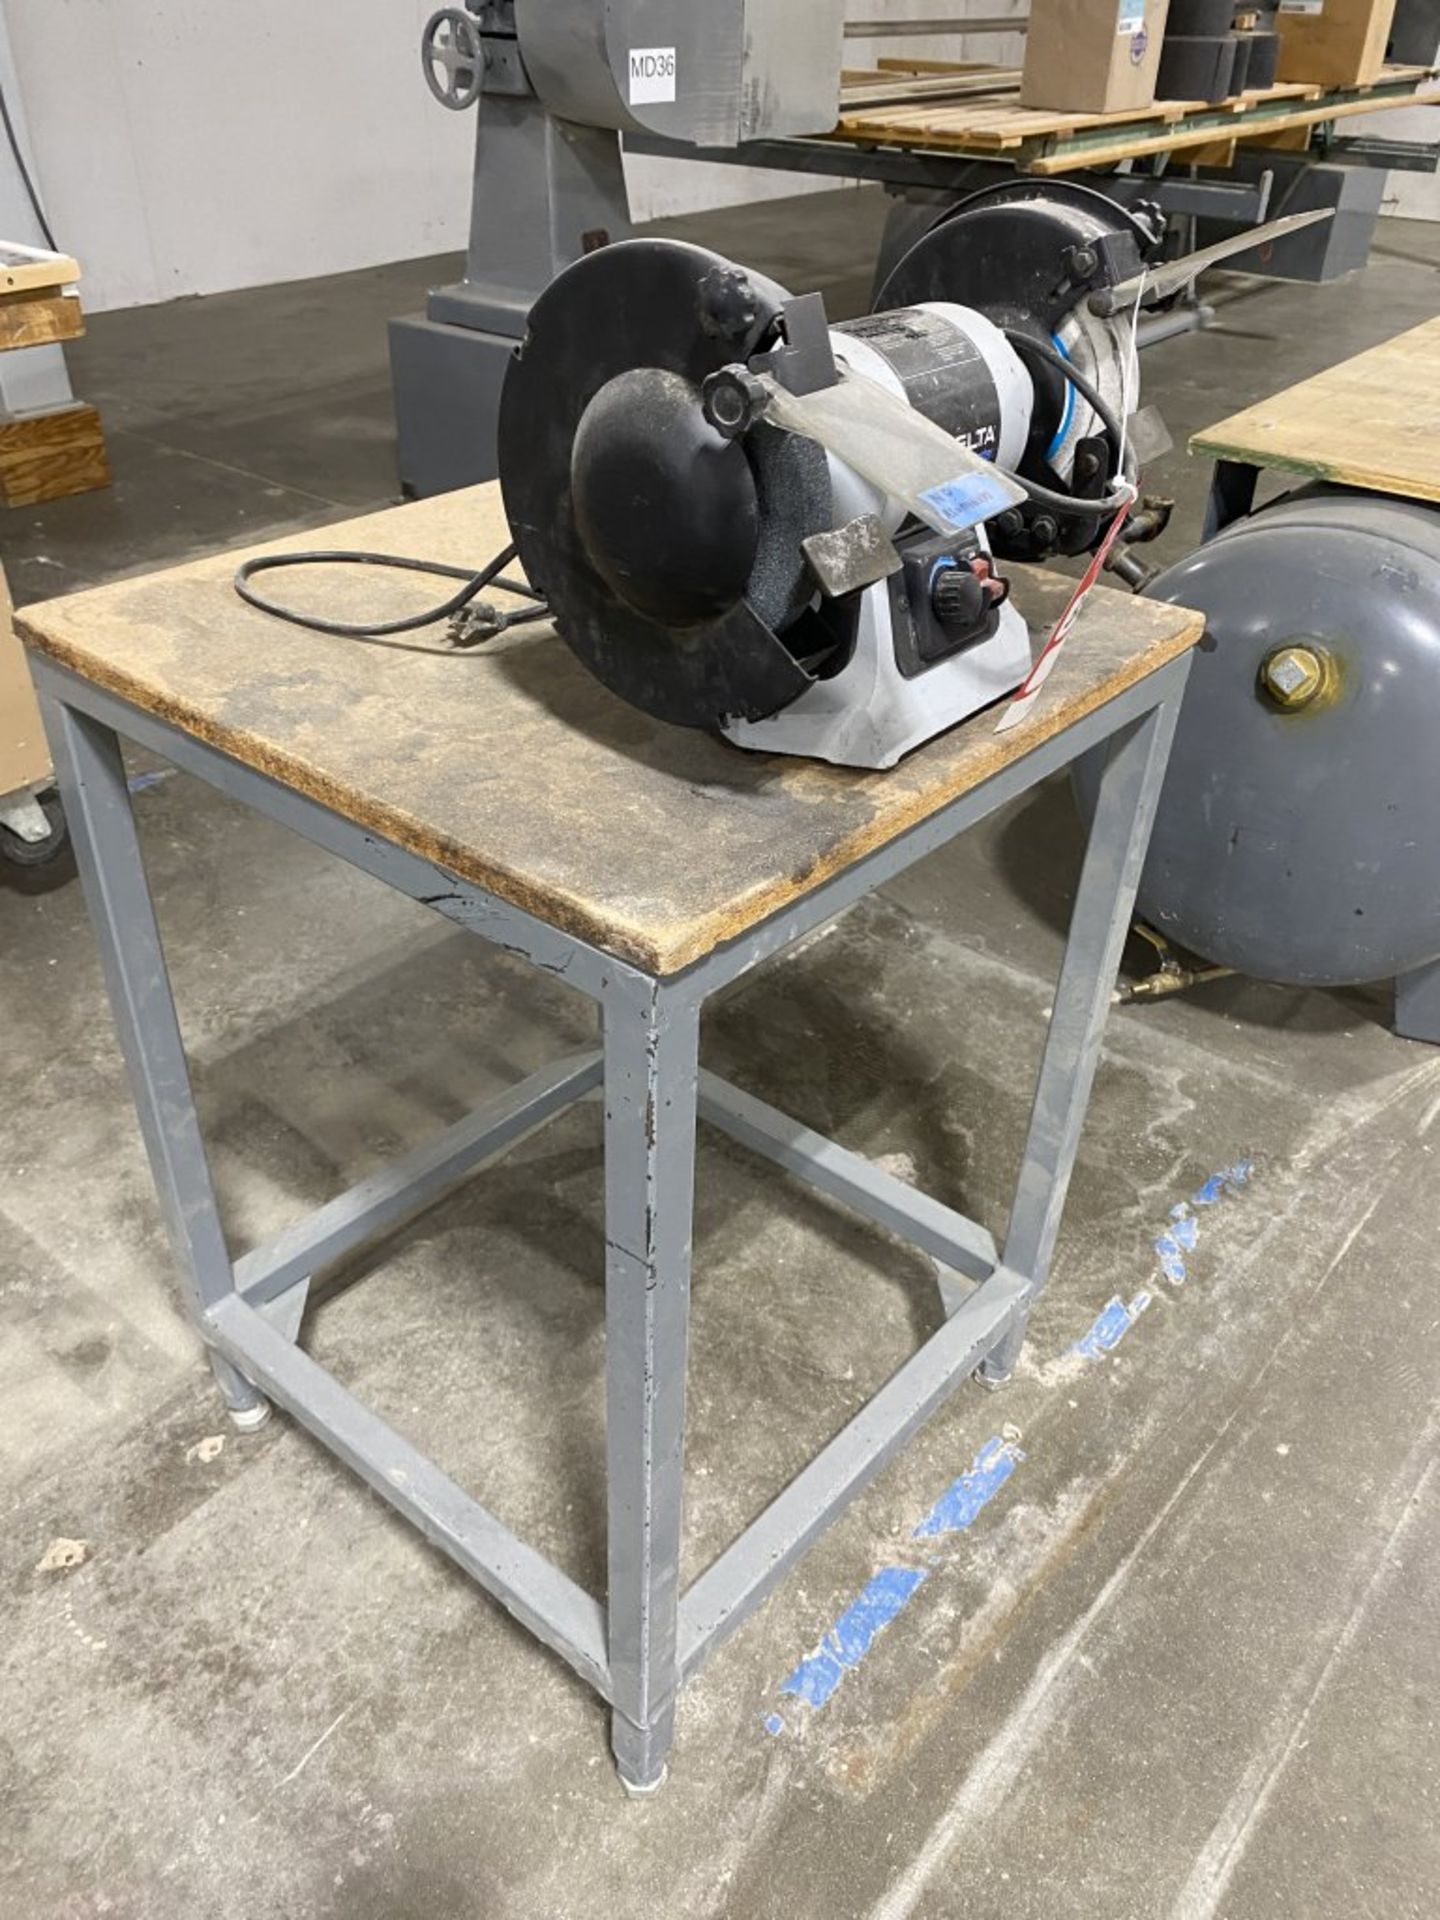 DELTA SHOPMASTER BENCH GRINDER, WITH METAL STAND - Image 2 of 6